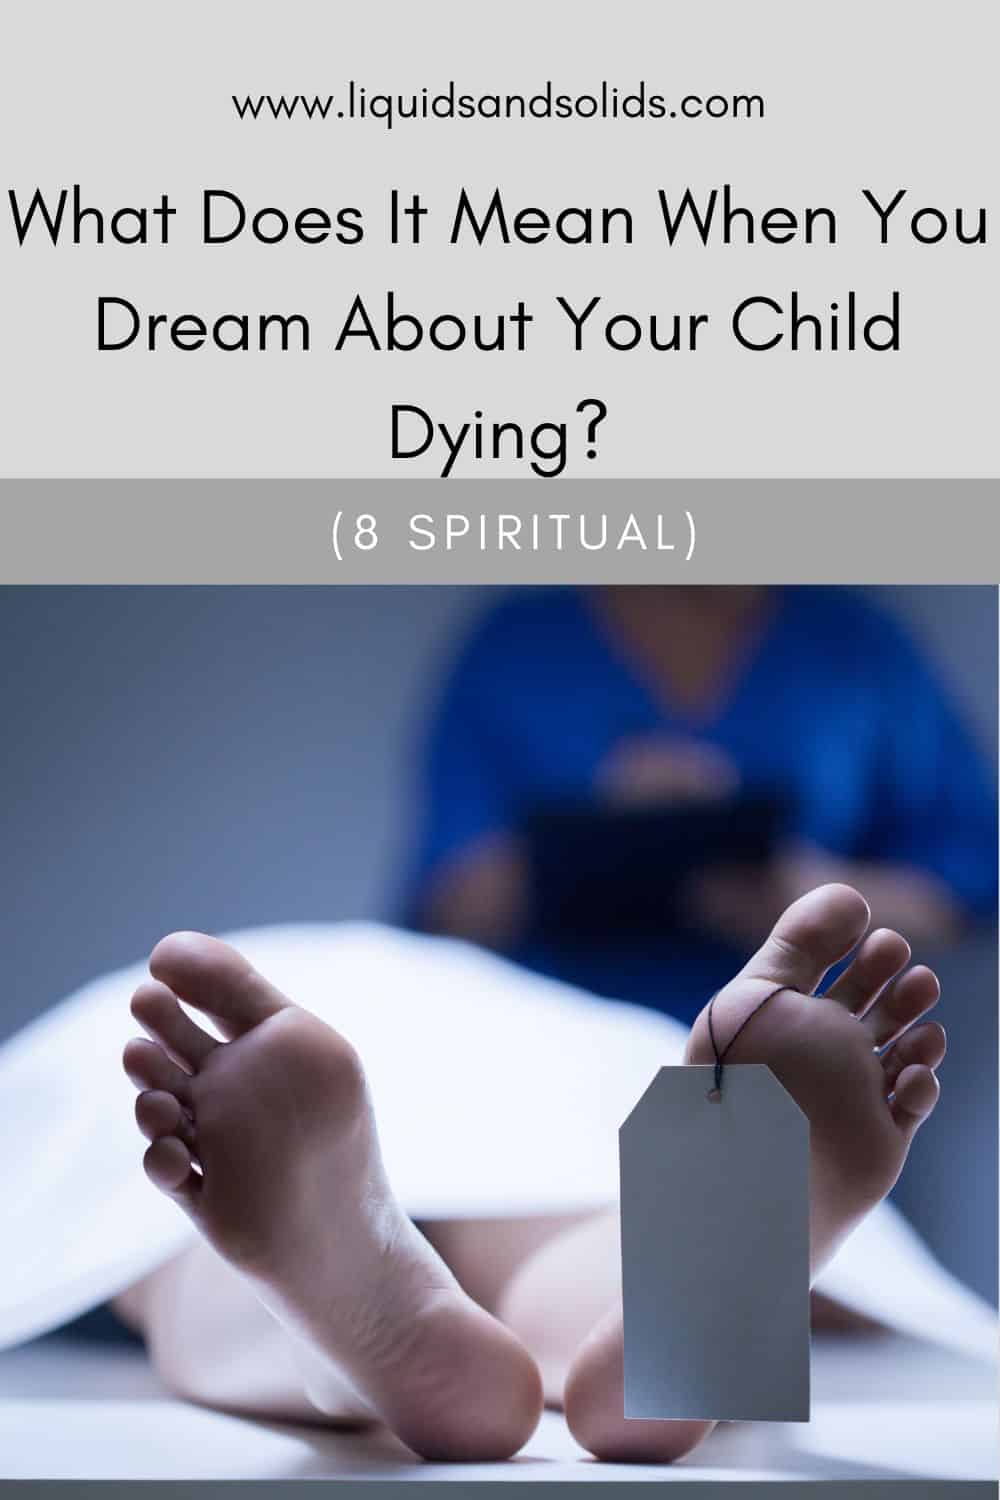 What Does It Mean When You Dream About Your Child Dying? (8 Spiritual)